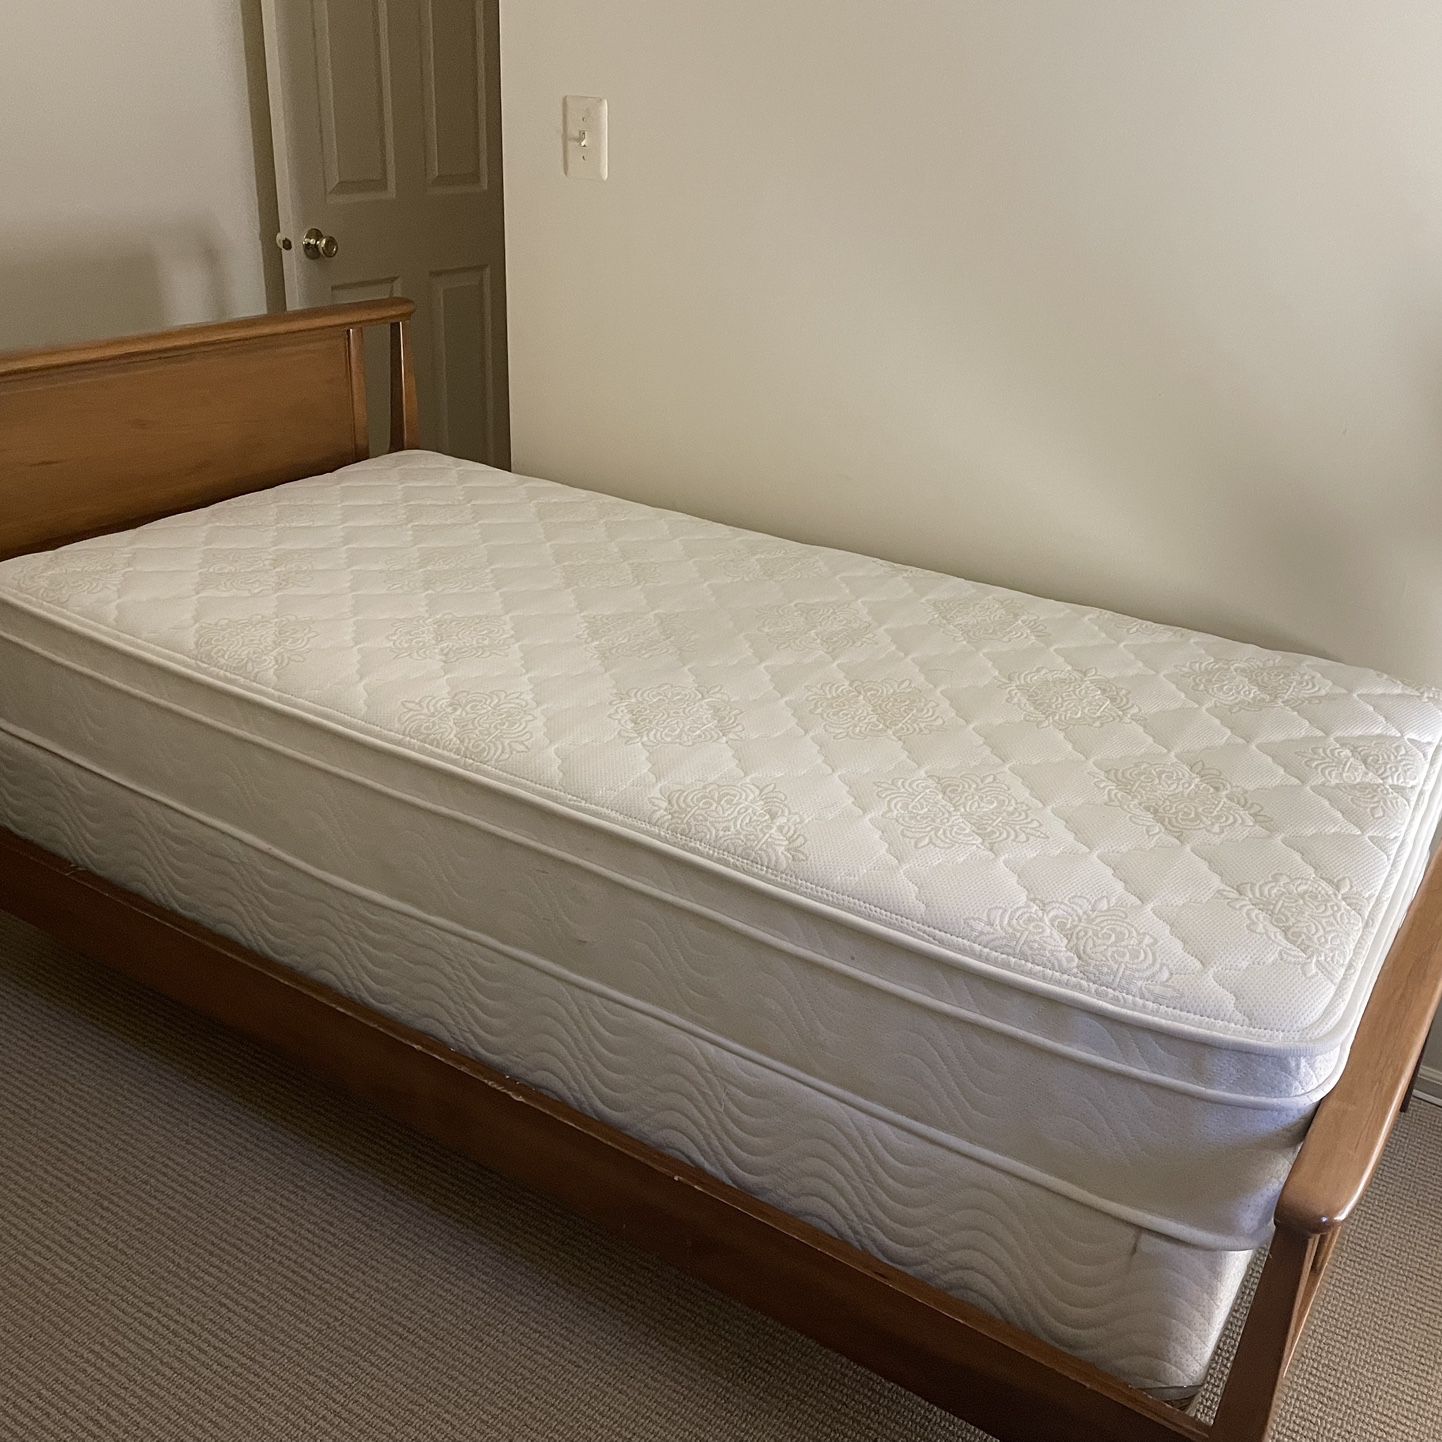 Simmons Beautyrest Single Bed Set (was $1,500)